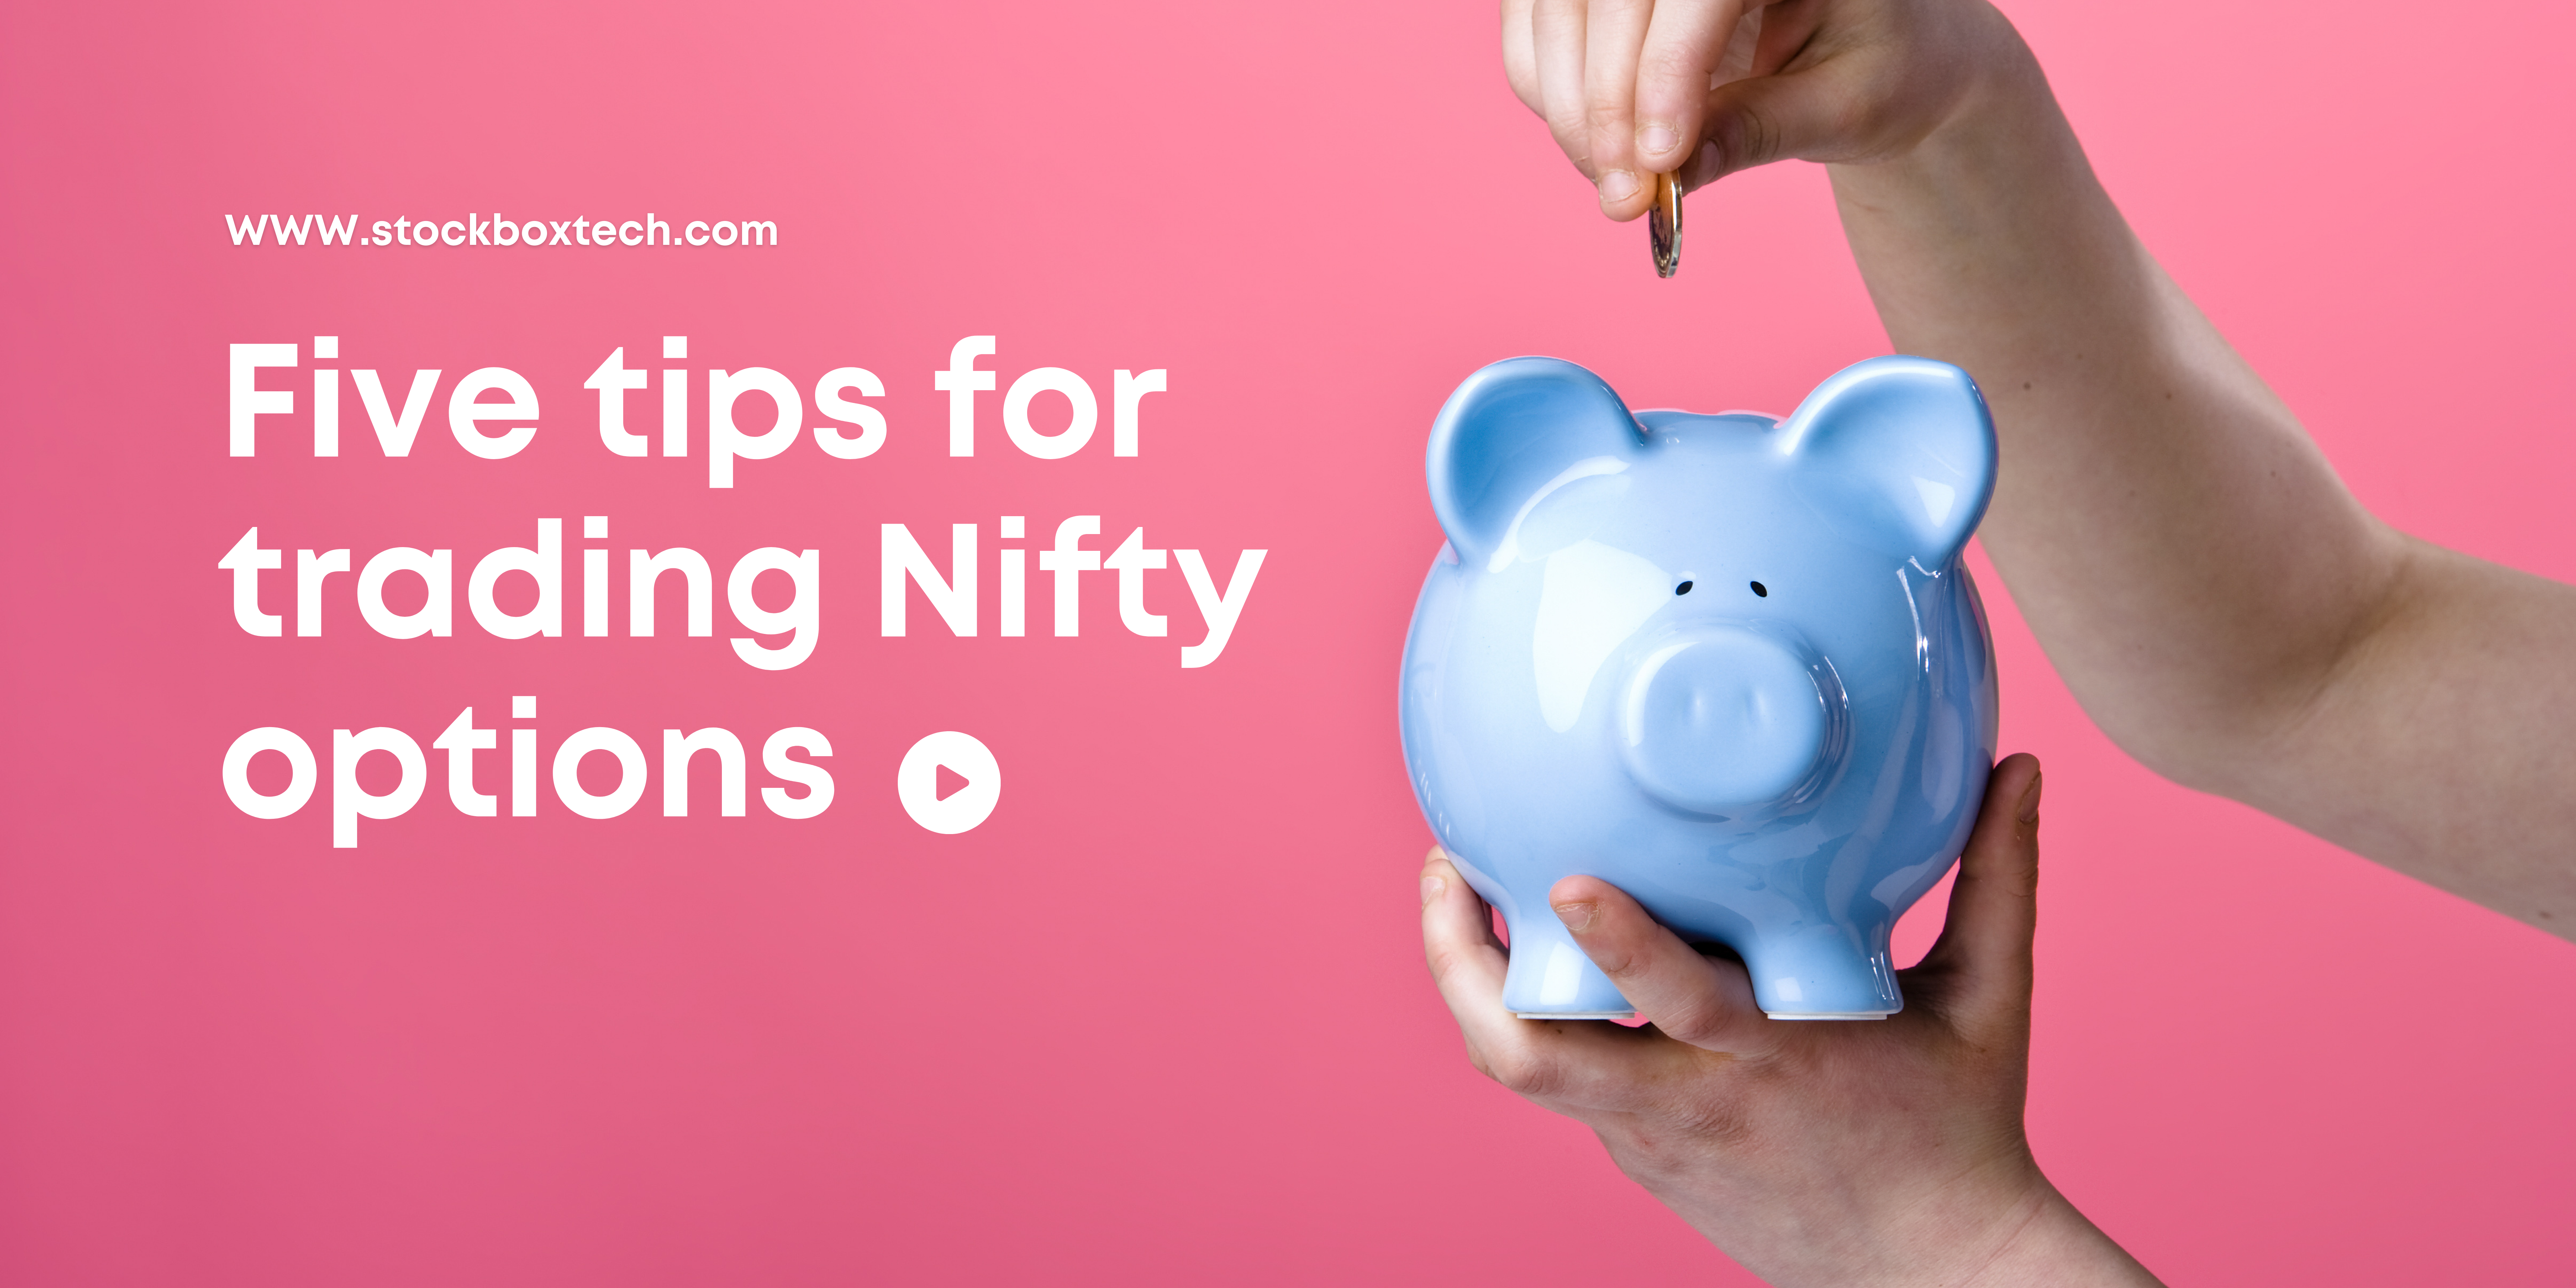 Nifty Options Trading Tips